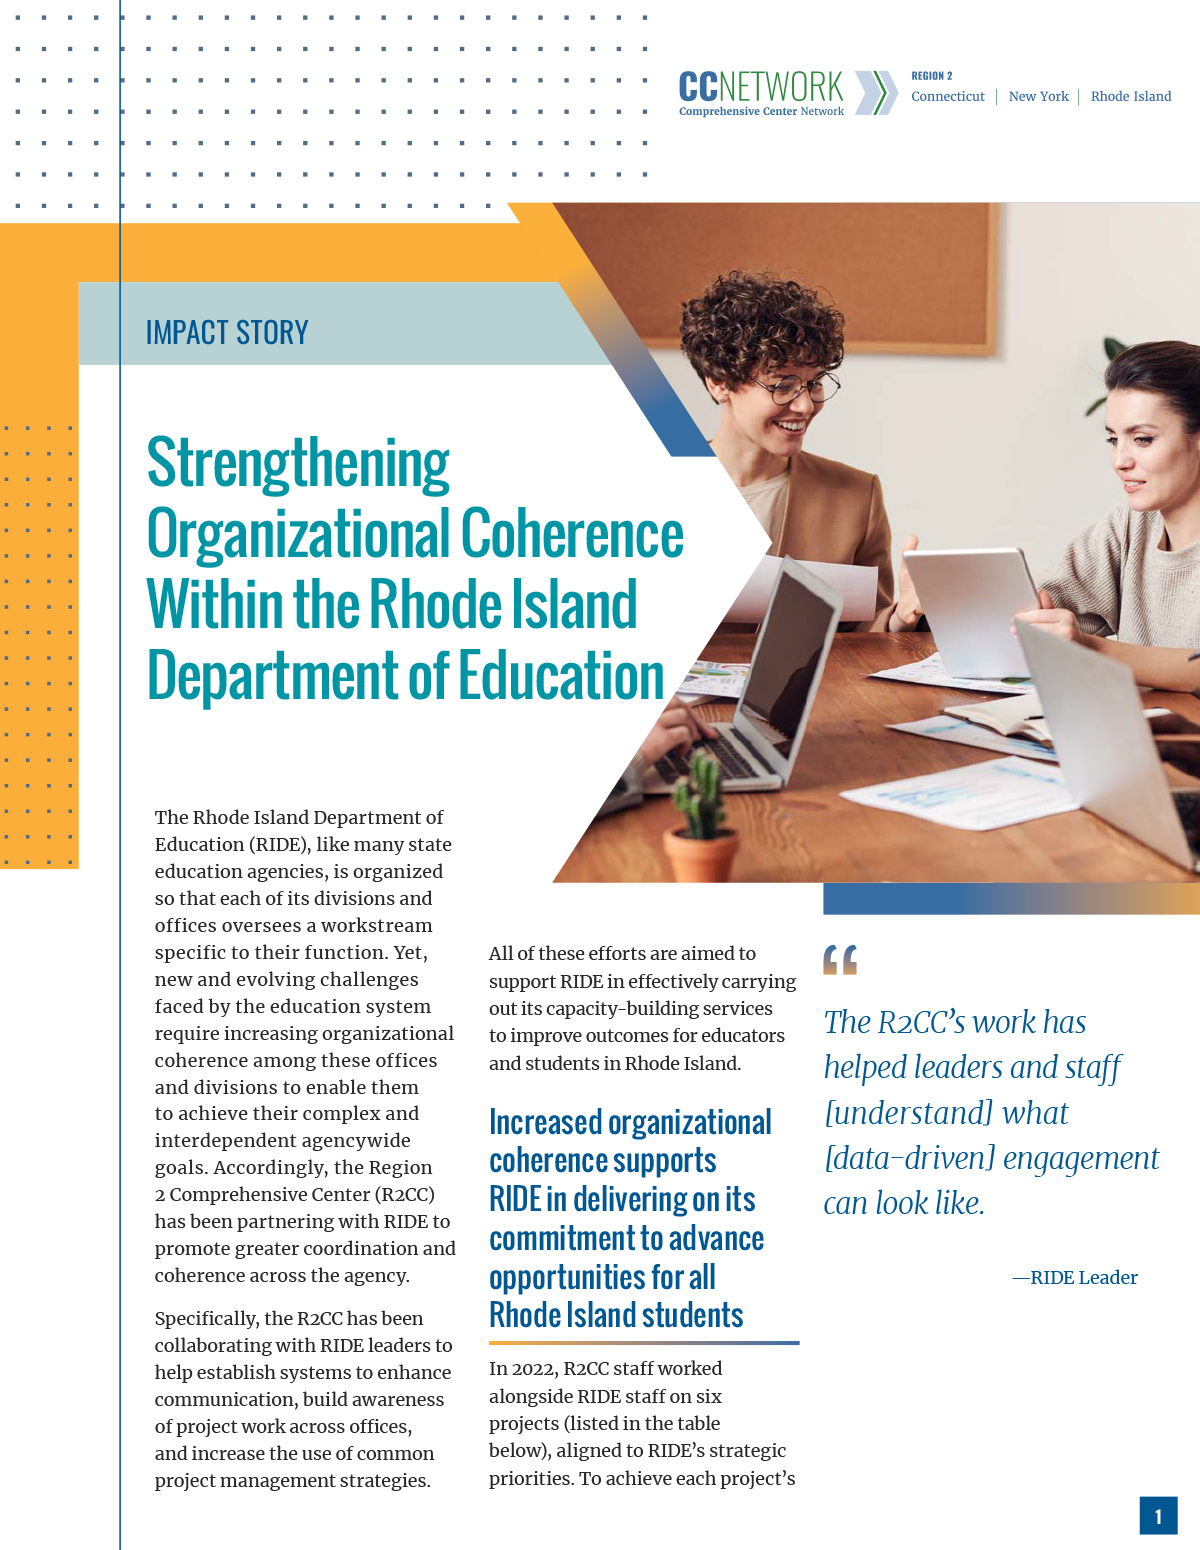 Strengthening Organizational Coherence Within the Rhode Island Department of Education